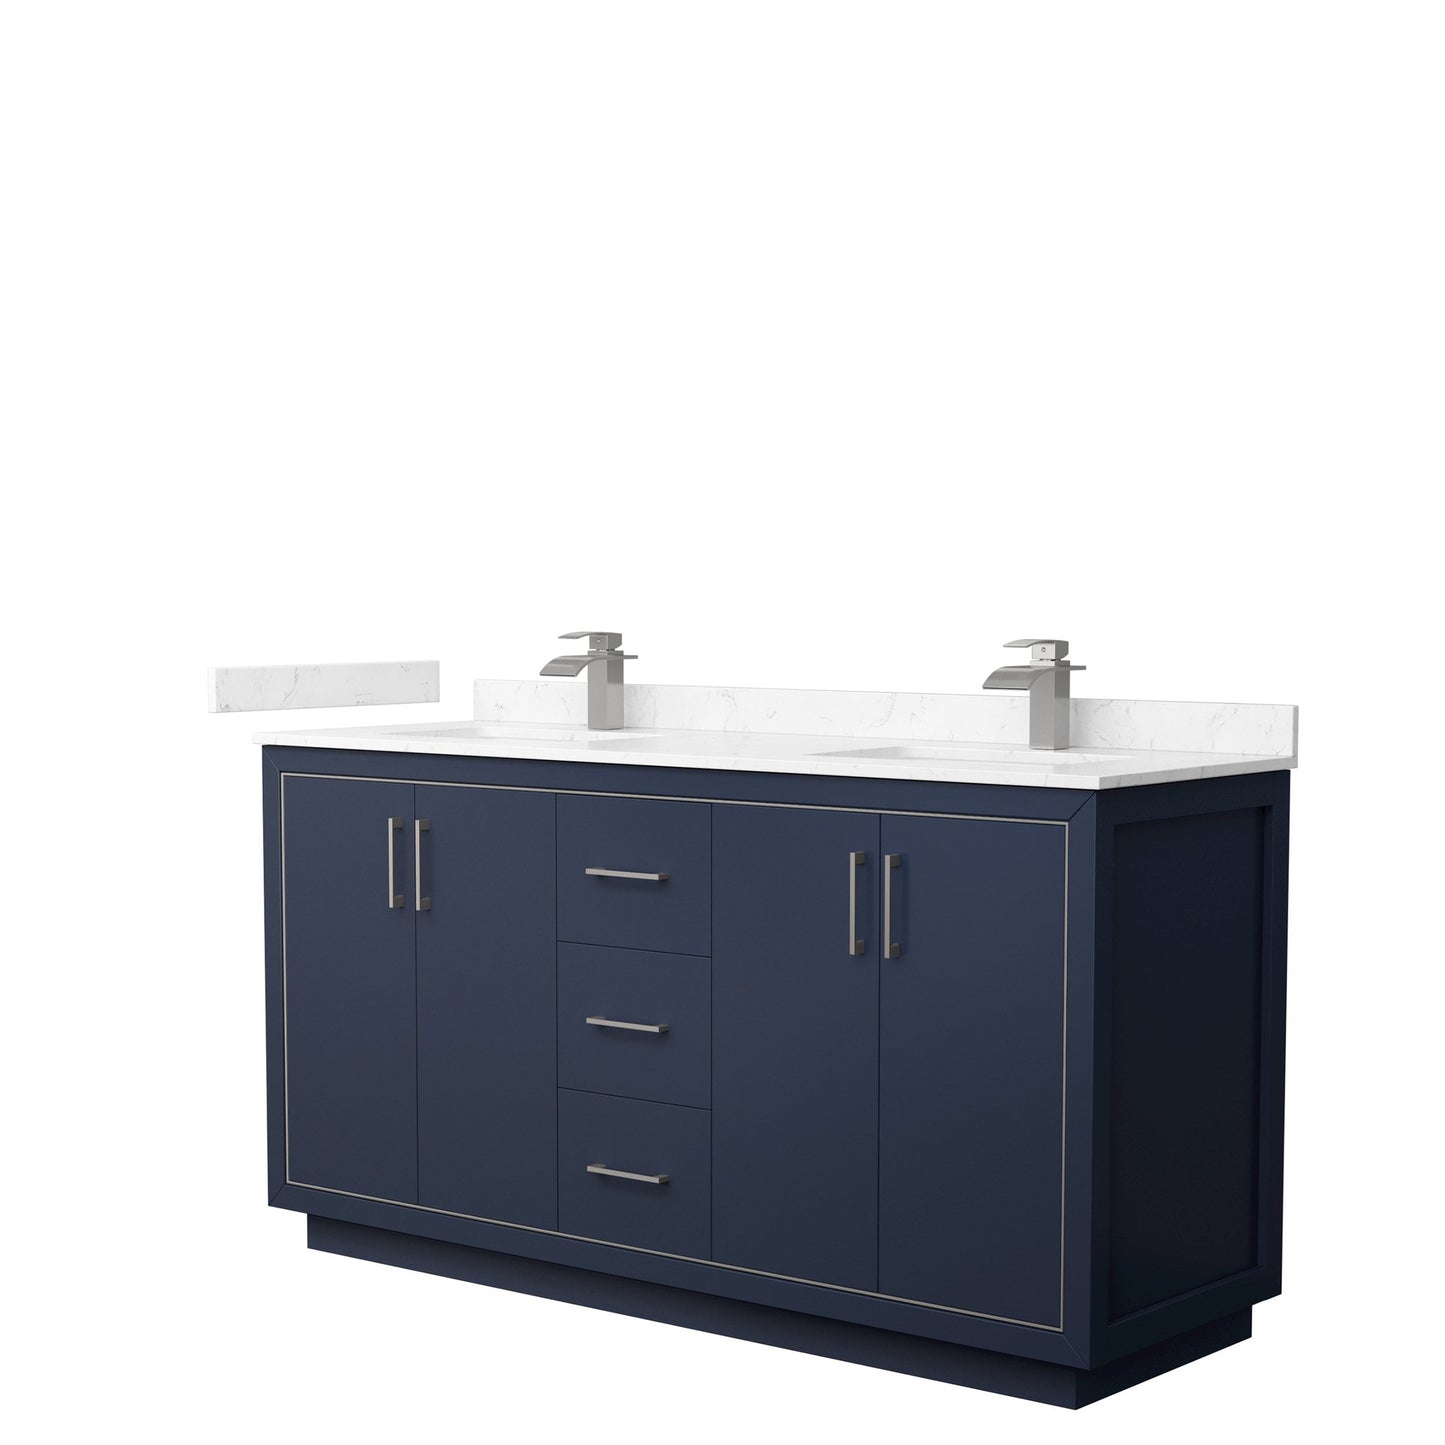 Wyndham Collection Icon 66" Double Bathroom Vanity in Dark Blue, Carrara Cultured Marble Countertop, Undermount Square Sinks, Brushed Nickel Trim